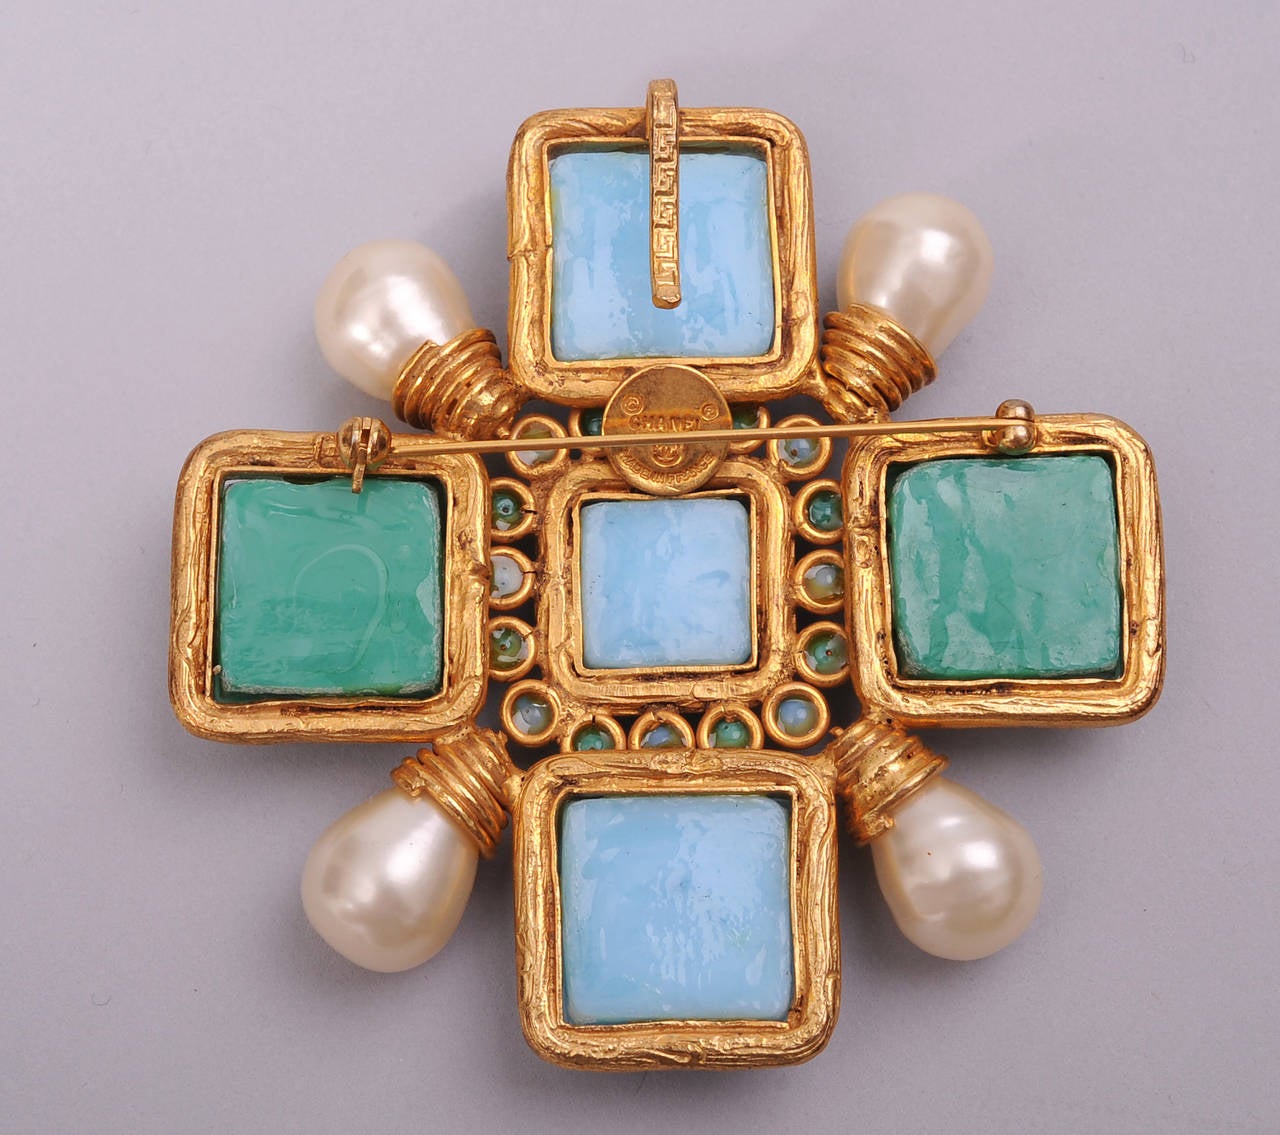 This stunning Maltese cross piece is so evocative of Coco Chanel and the jewelry she wore. It can be worn as a pin or as a pendant. Beautiful shades of blue and green poured glass are accented with large pearls and gold toned metal work. Worn once